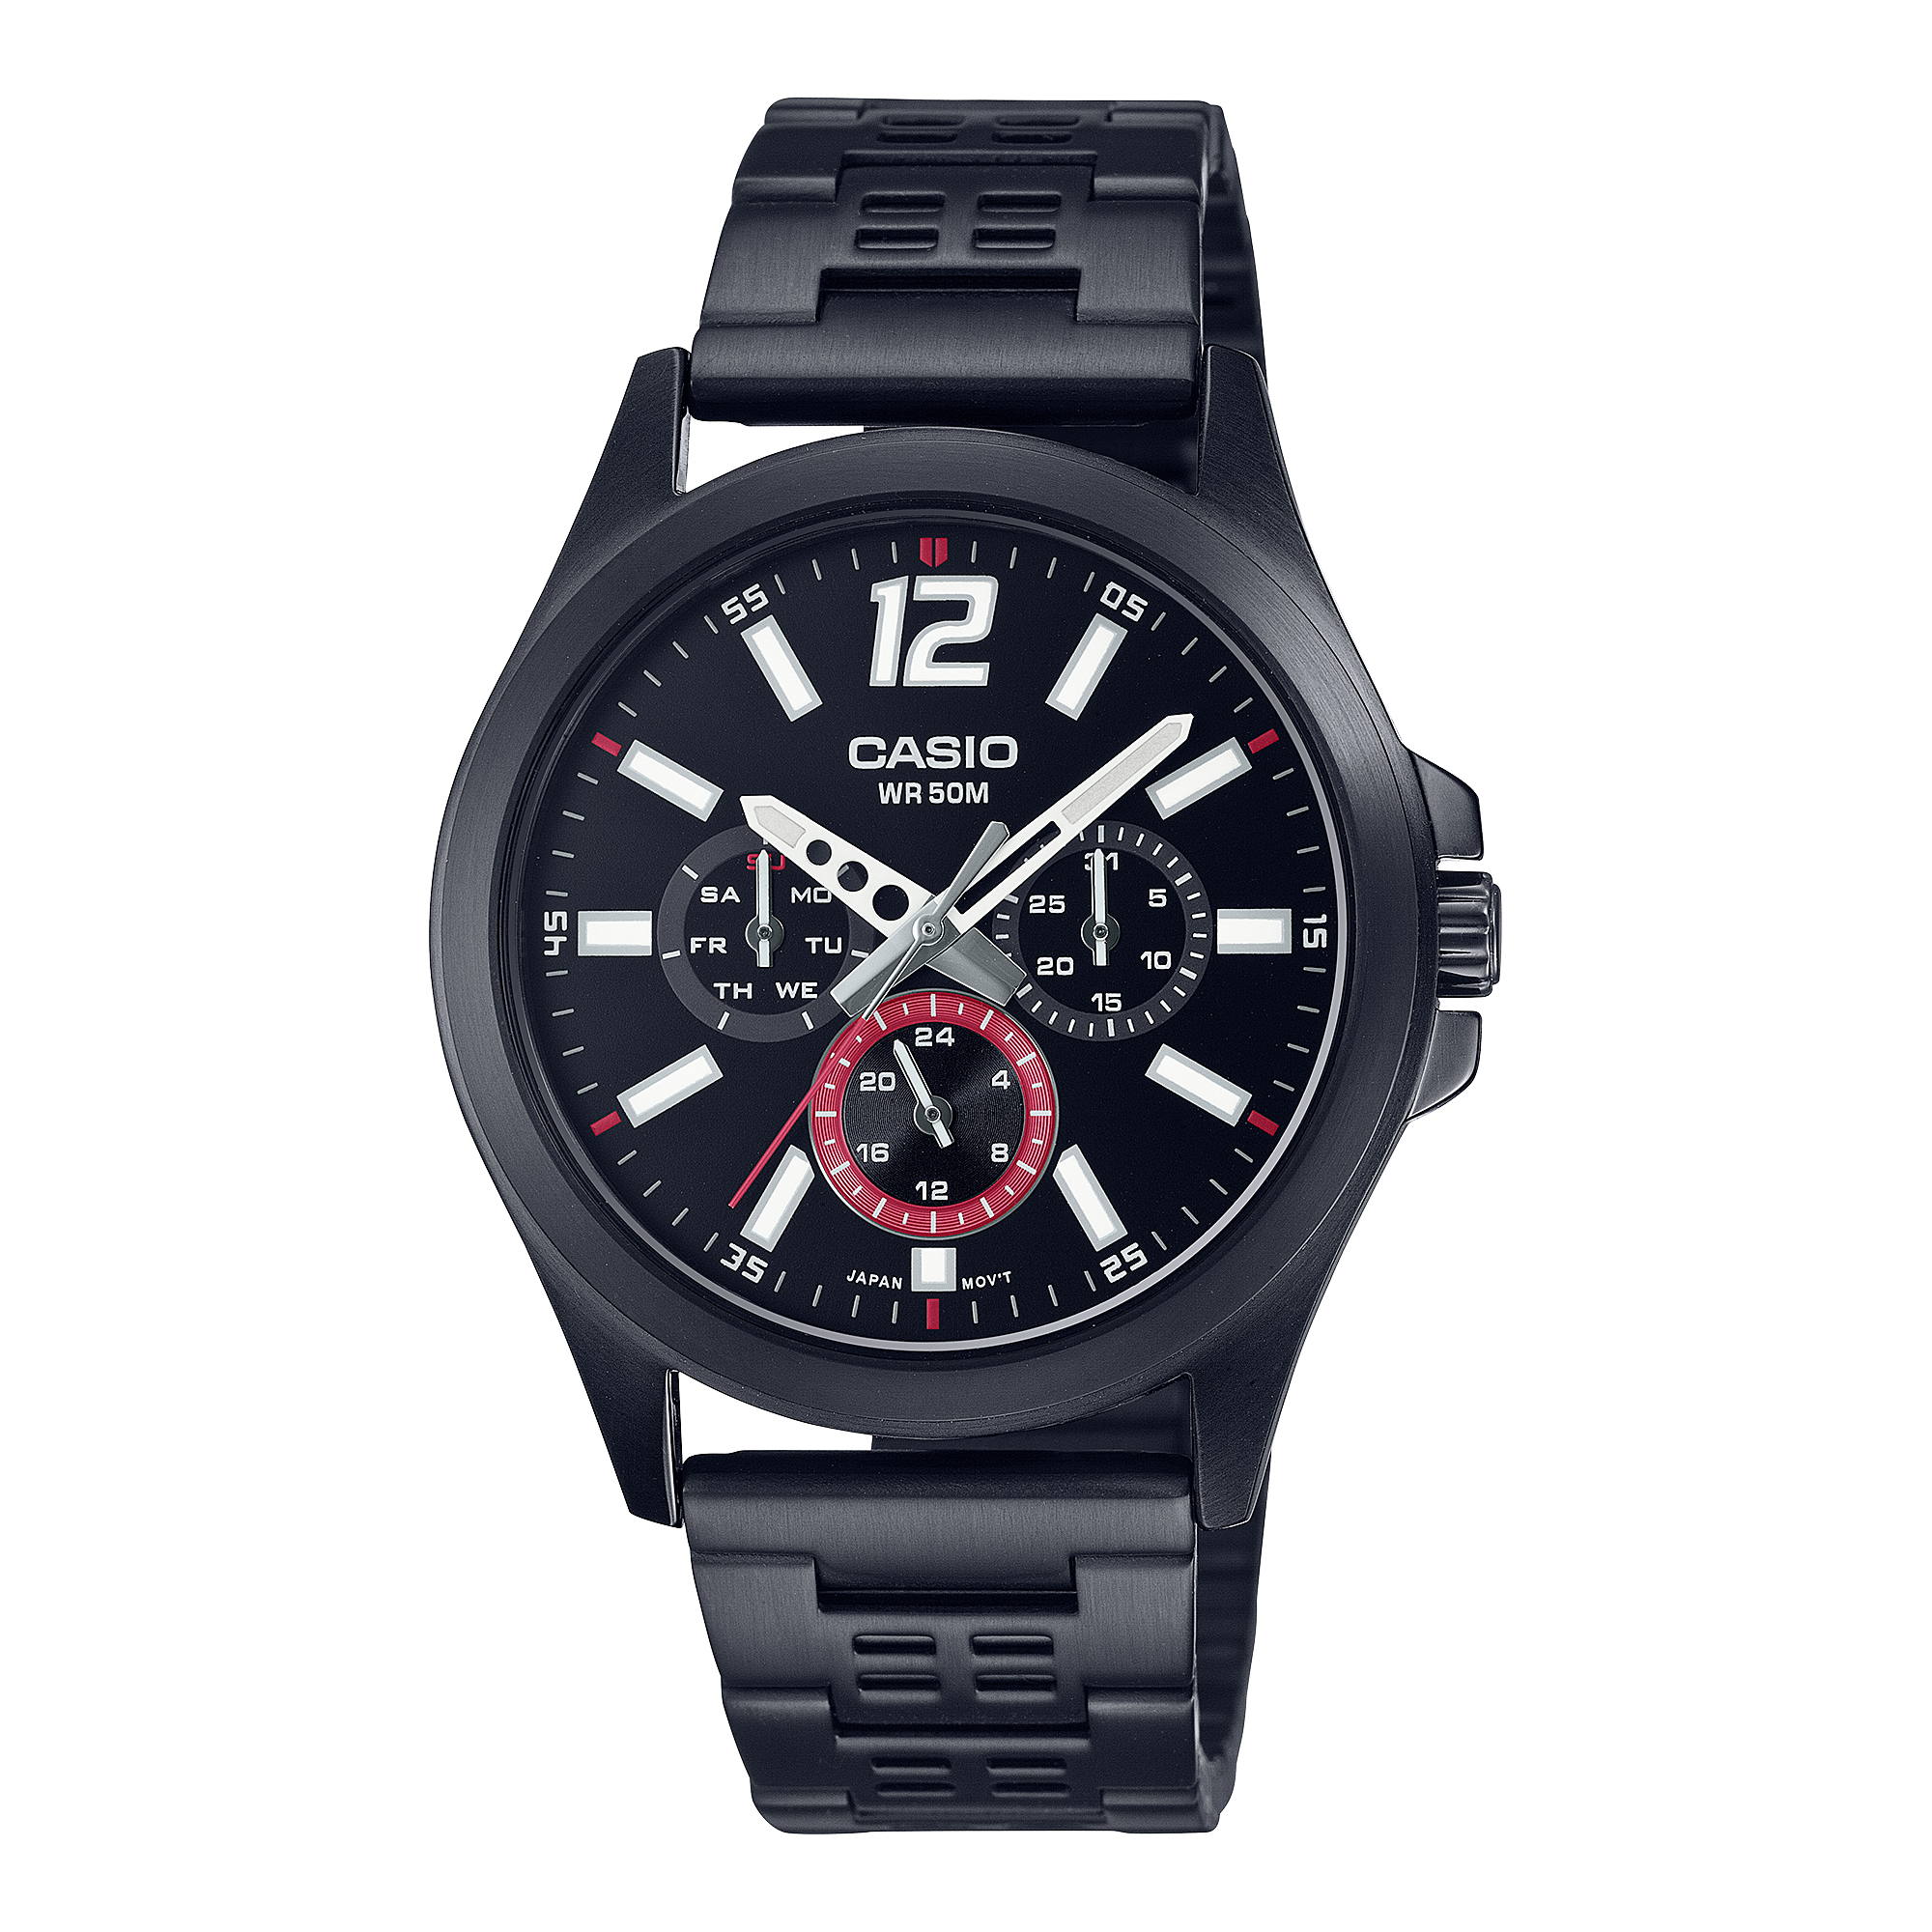 Casio Men's Black Watch - MTP-E350B-1BVDF | Stainless Steel | Water-Resistant | Quartz Movement | Sleek Men's | Fashionable | Formal And Casual Wear | Timeless Design | Halabh